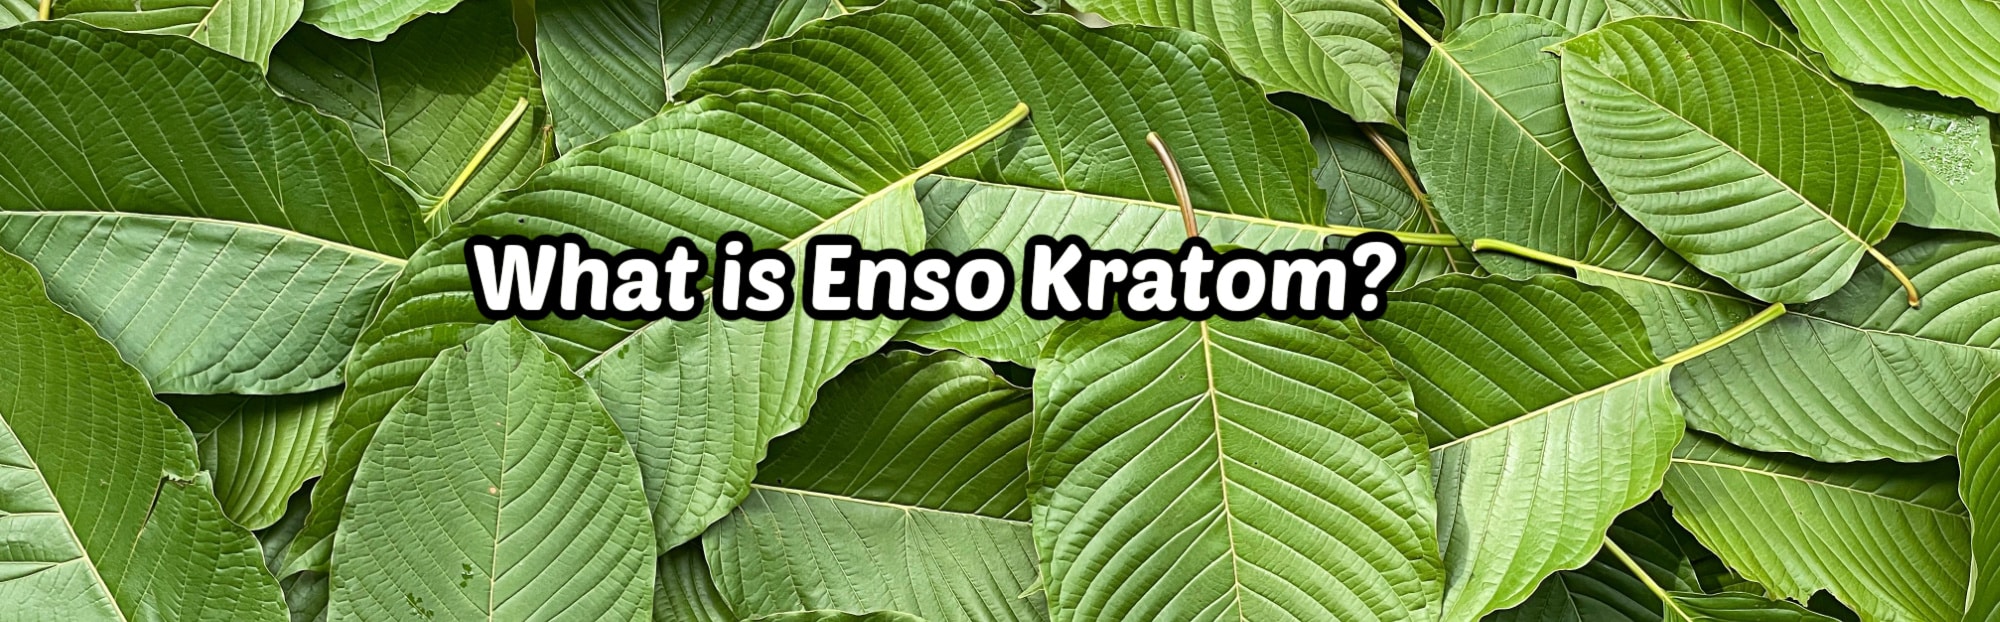 image of what is enso kratom